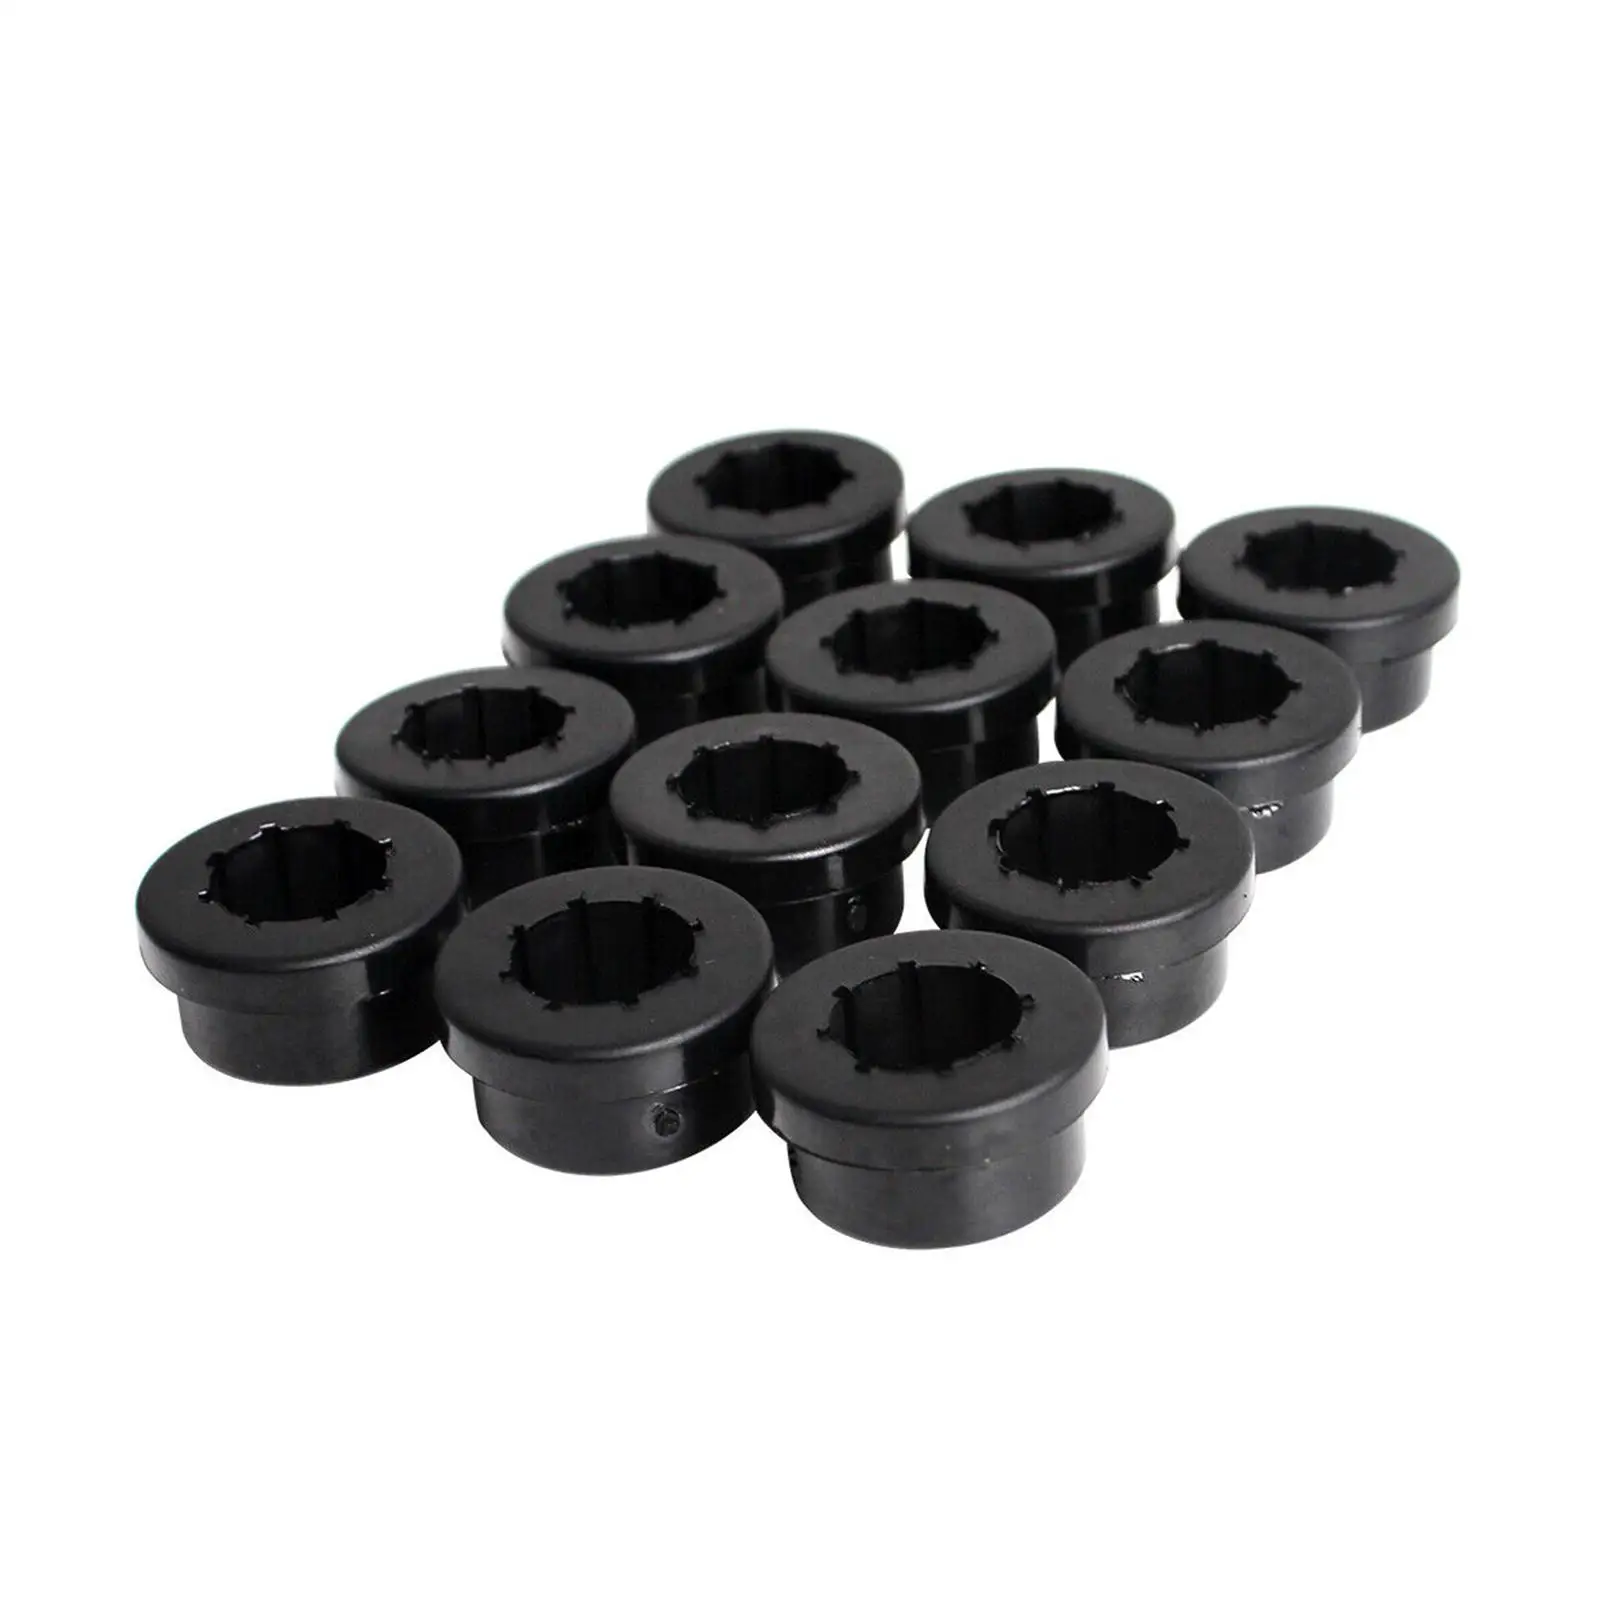 12 Pieces Lower Control Arm Rear Camber Bushings Engine Bushings Replace High Performance for Skunk2 Eg EK DC Accessories